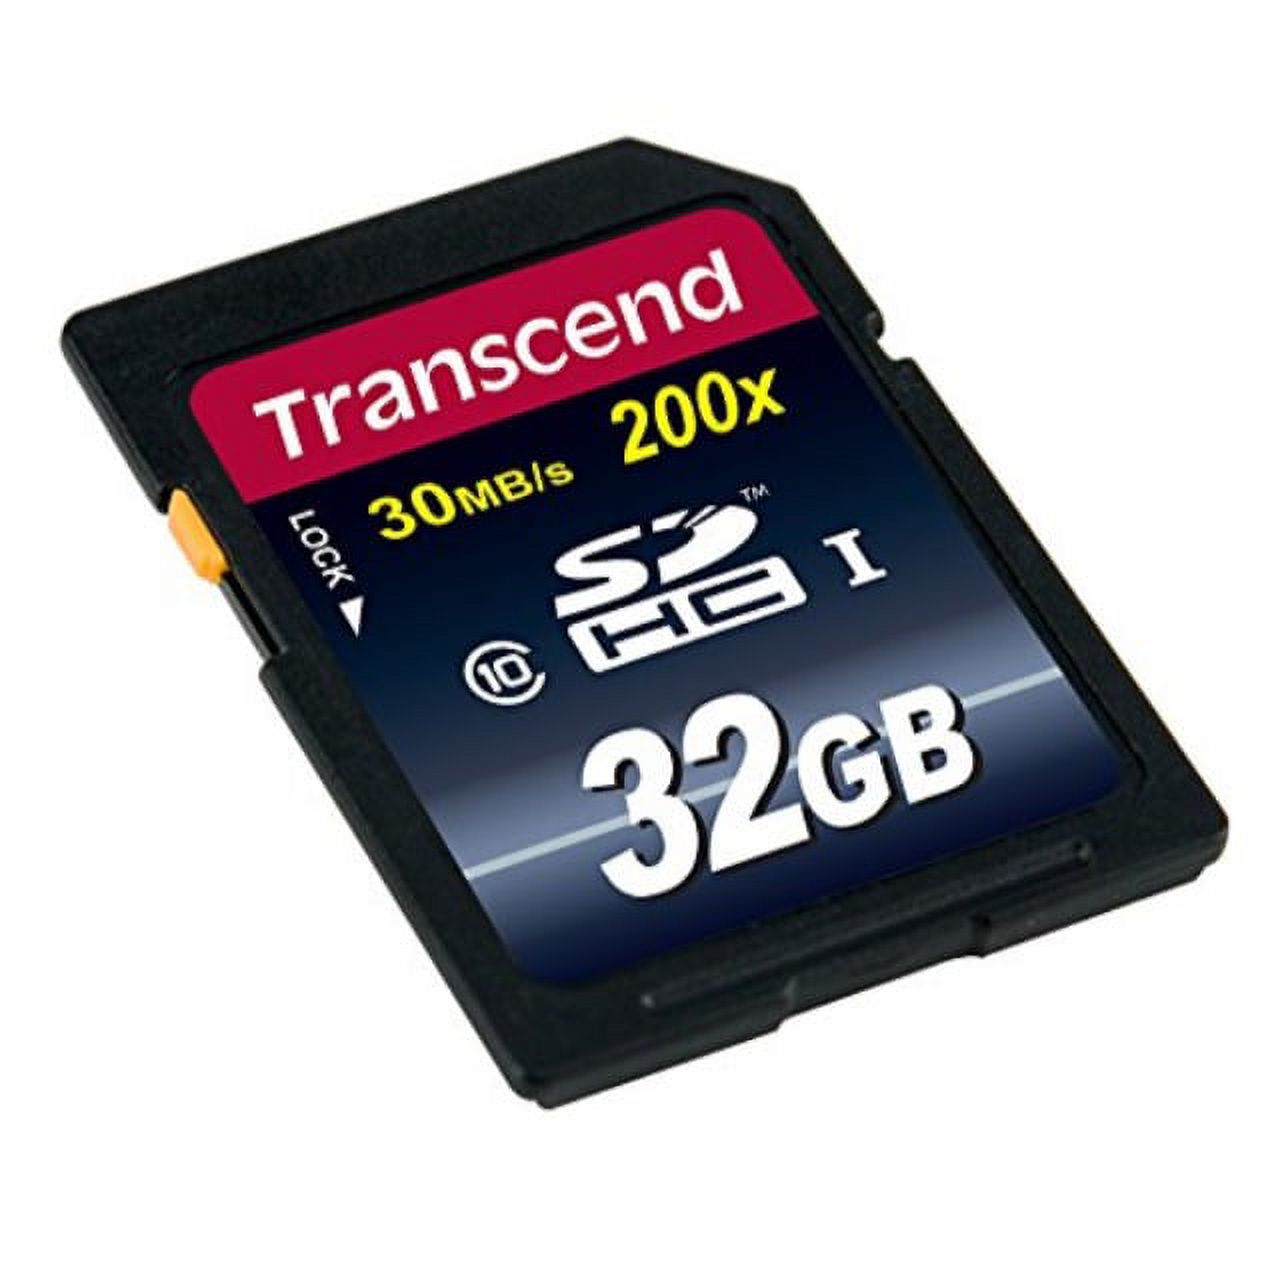 transcend 32gb sdhc class 10 flash memory card up to 30mb/s (ts32gsdhc10) - image 1 of 3